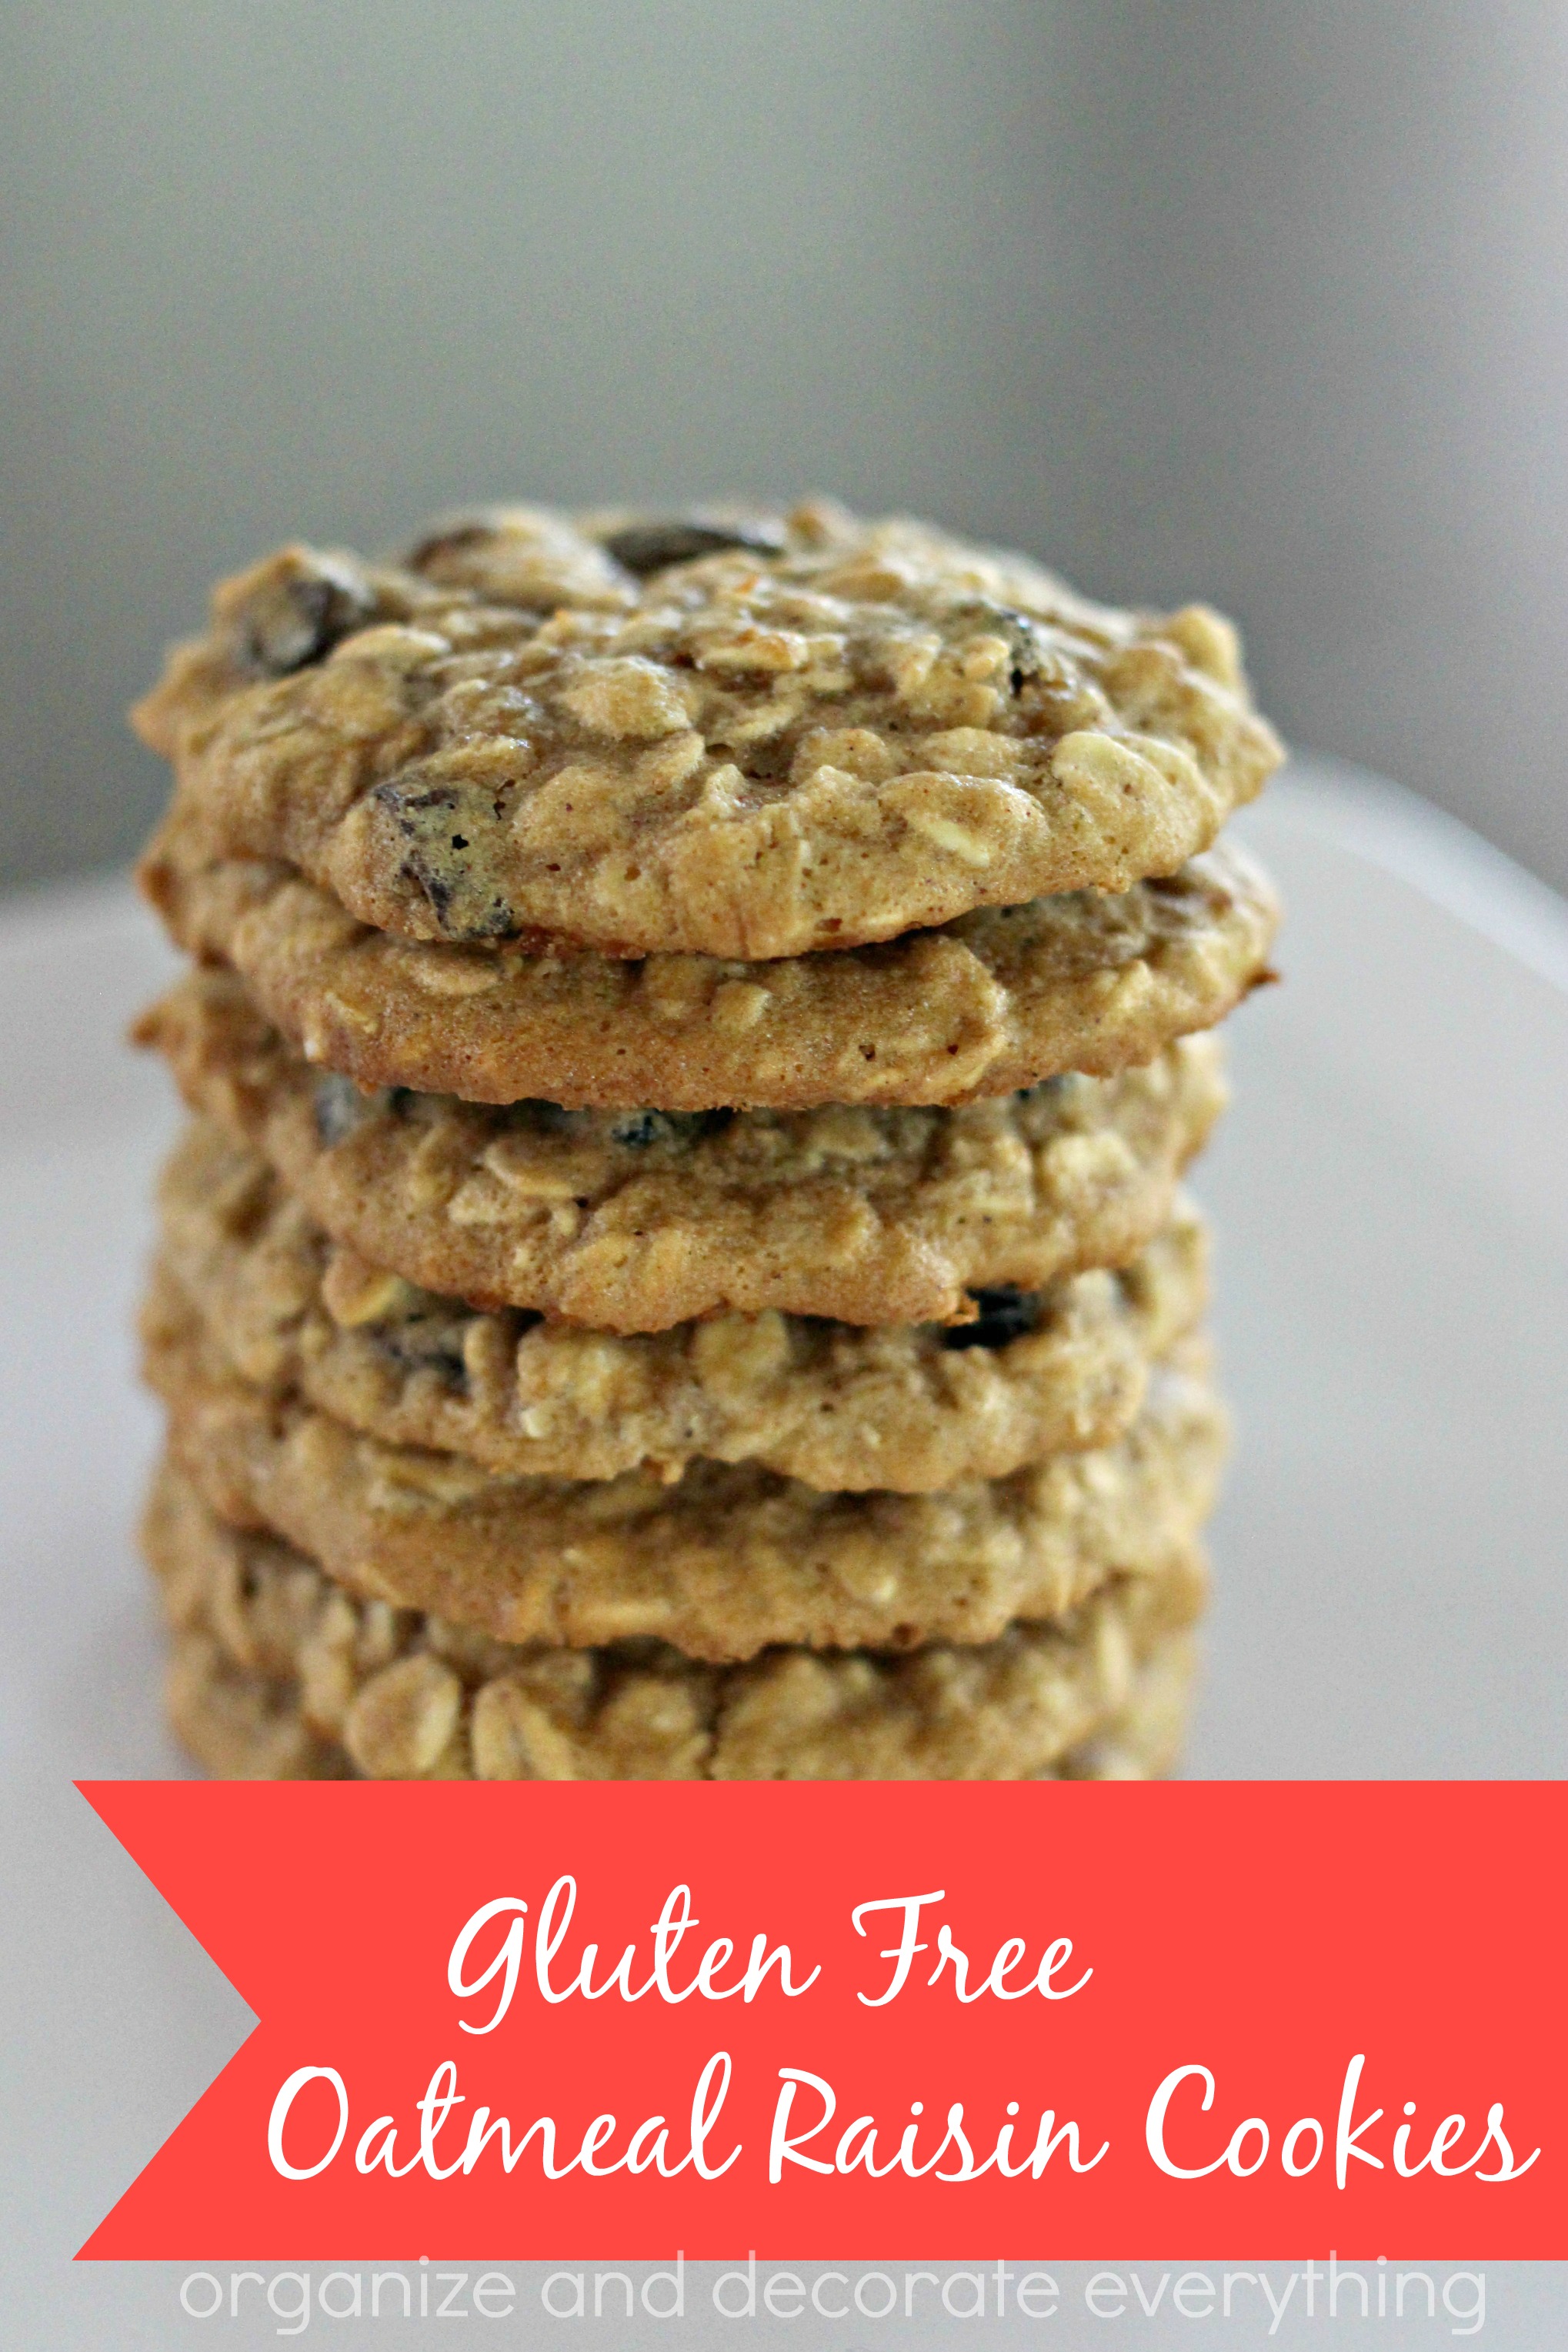 Gluten Free Oatmeal Raisin Cookies - Organize and Decorate Everything